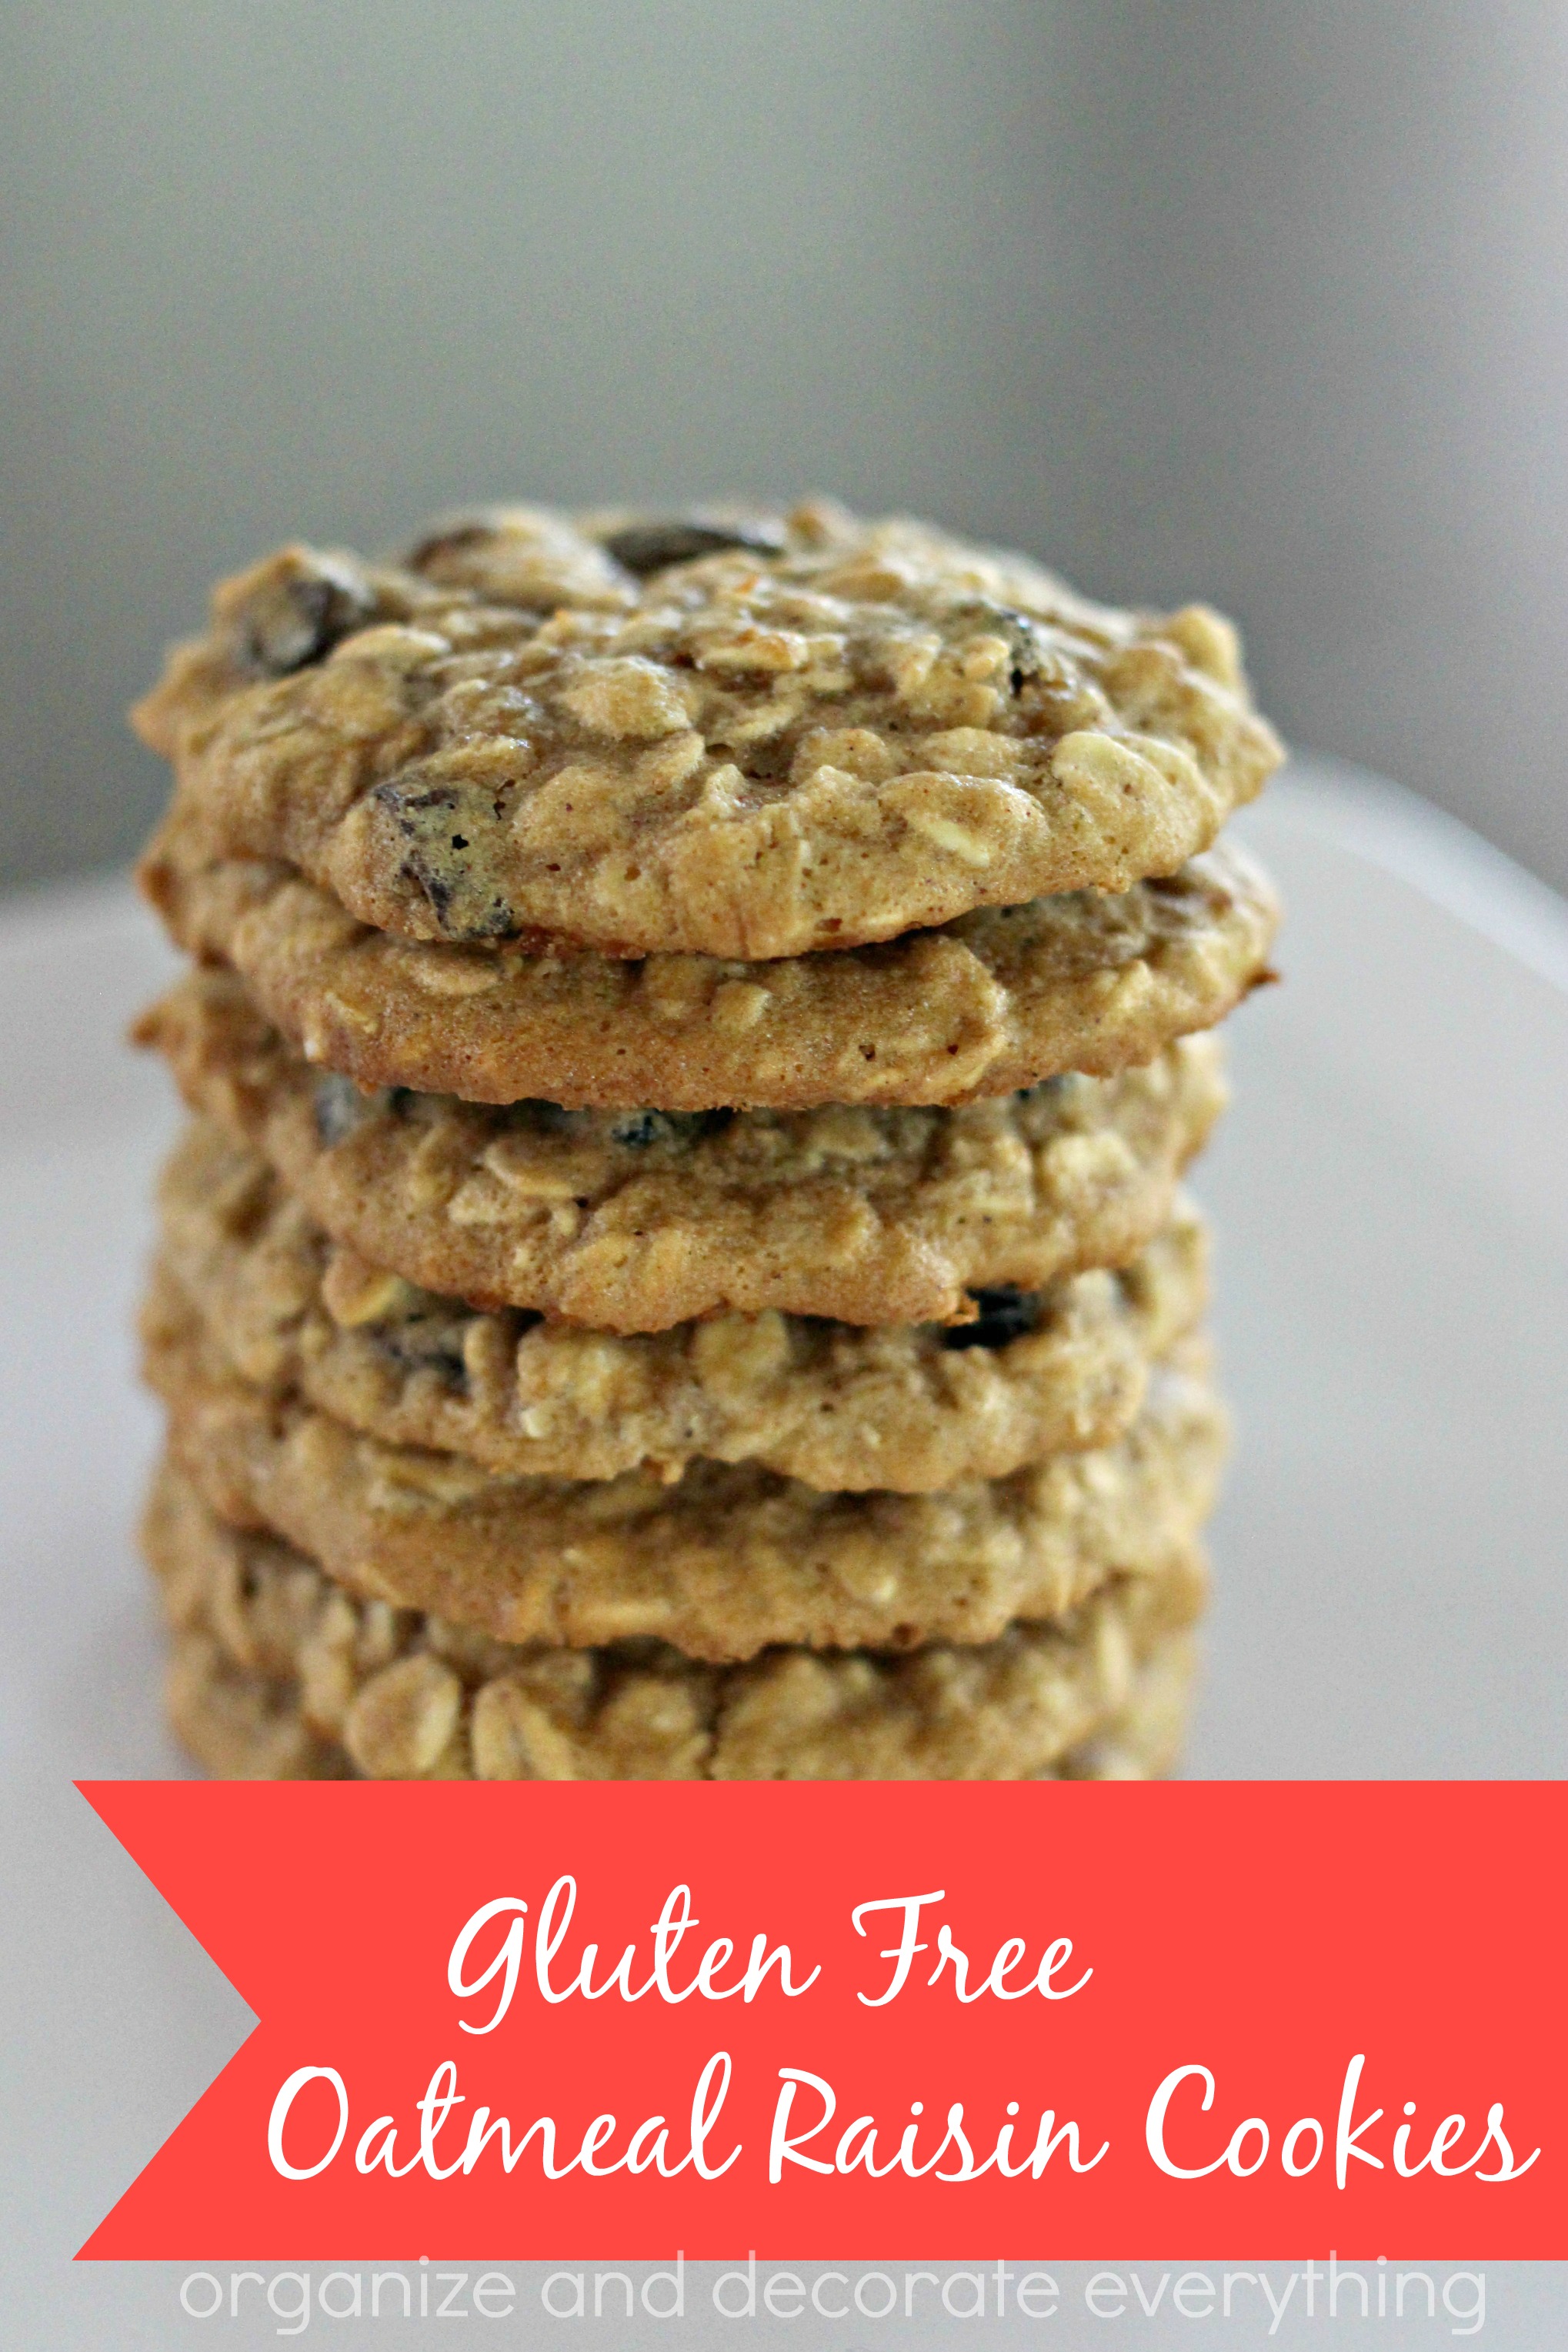 Gluten Free Oatmeal Raisin Cookies - Organize and Decorate Everything